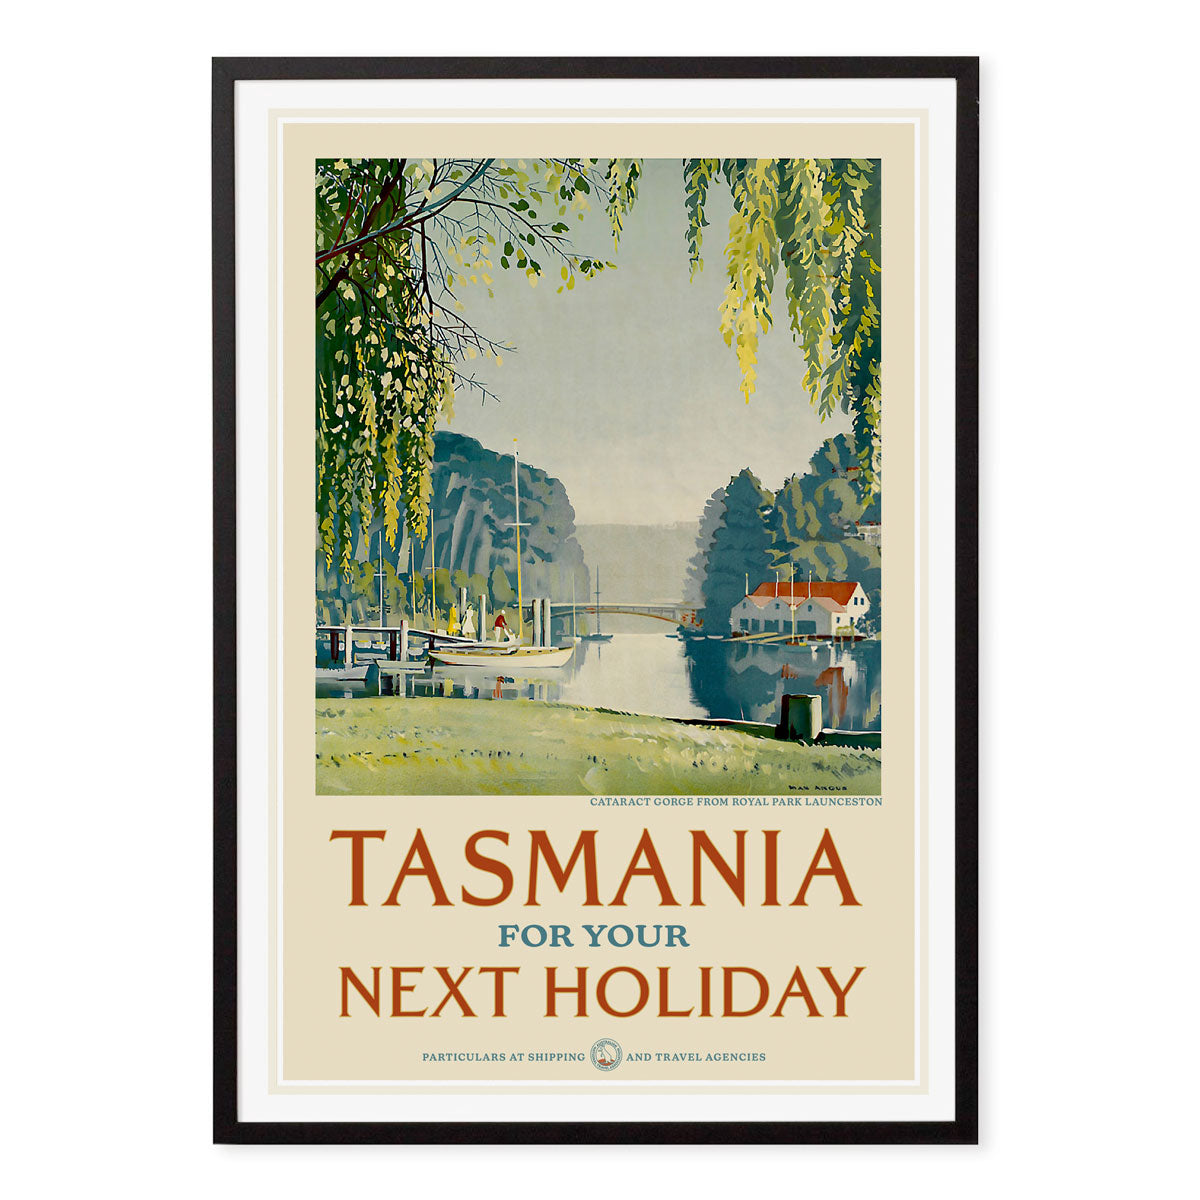 Tasmania nextholiday vintage advertising poster in black frame from Places We Luv